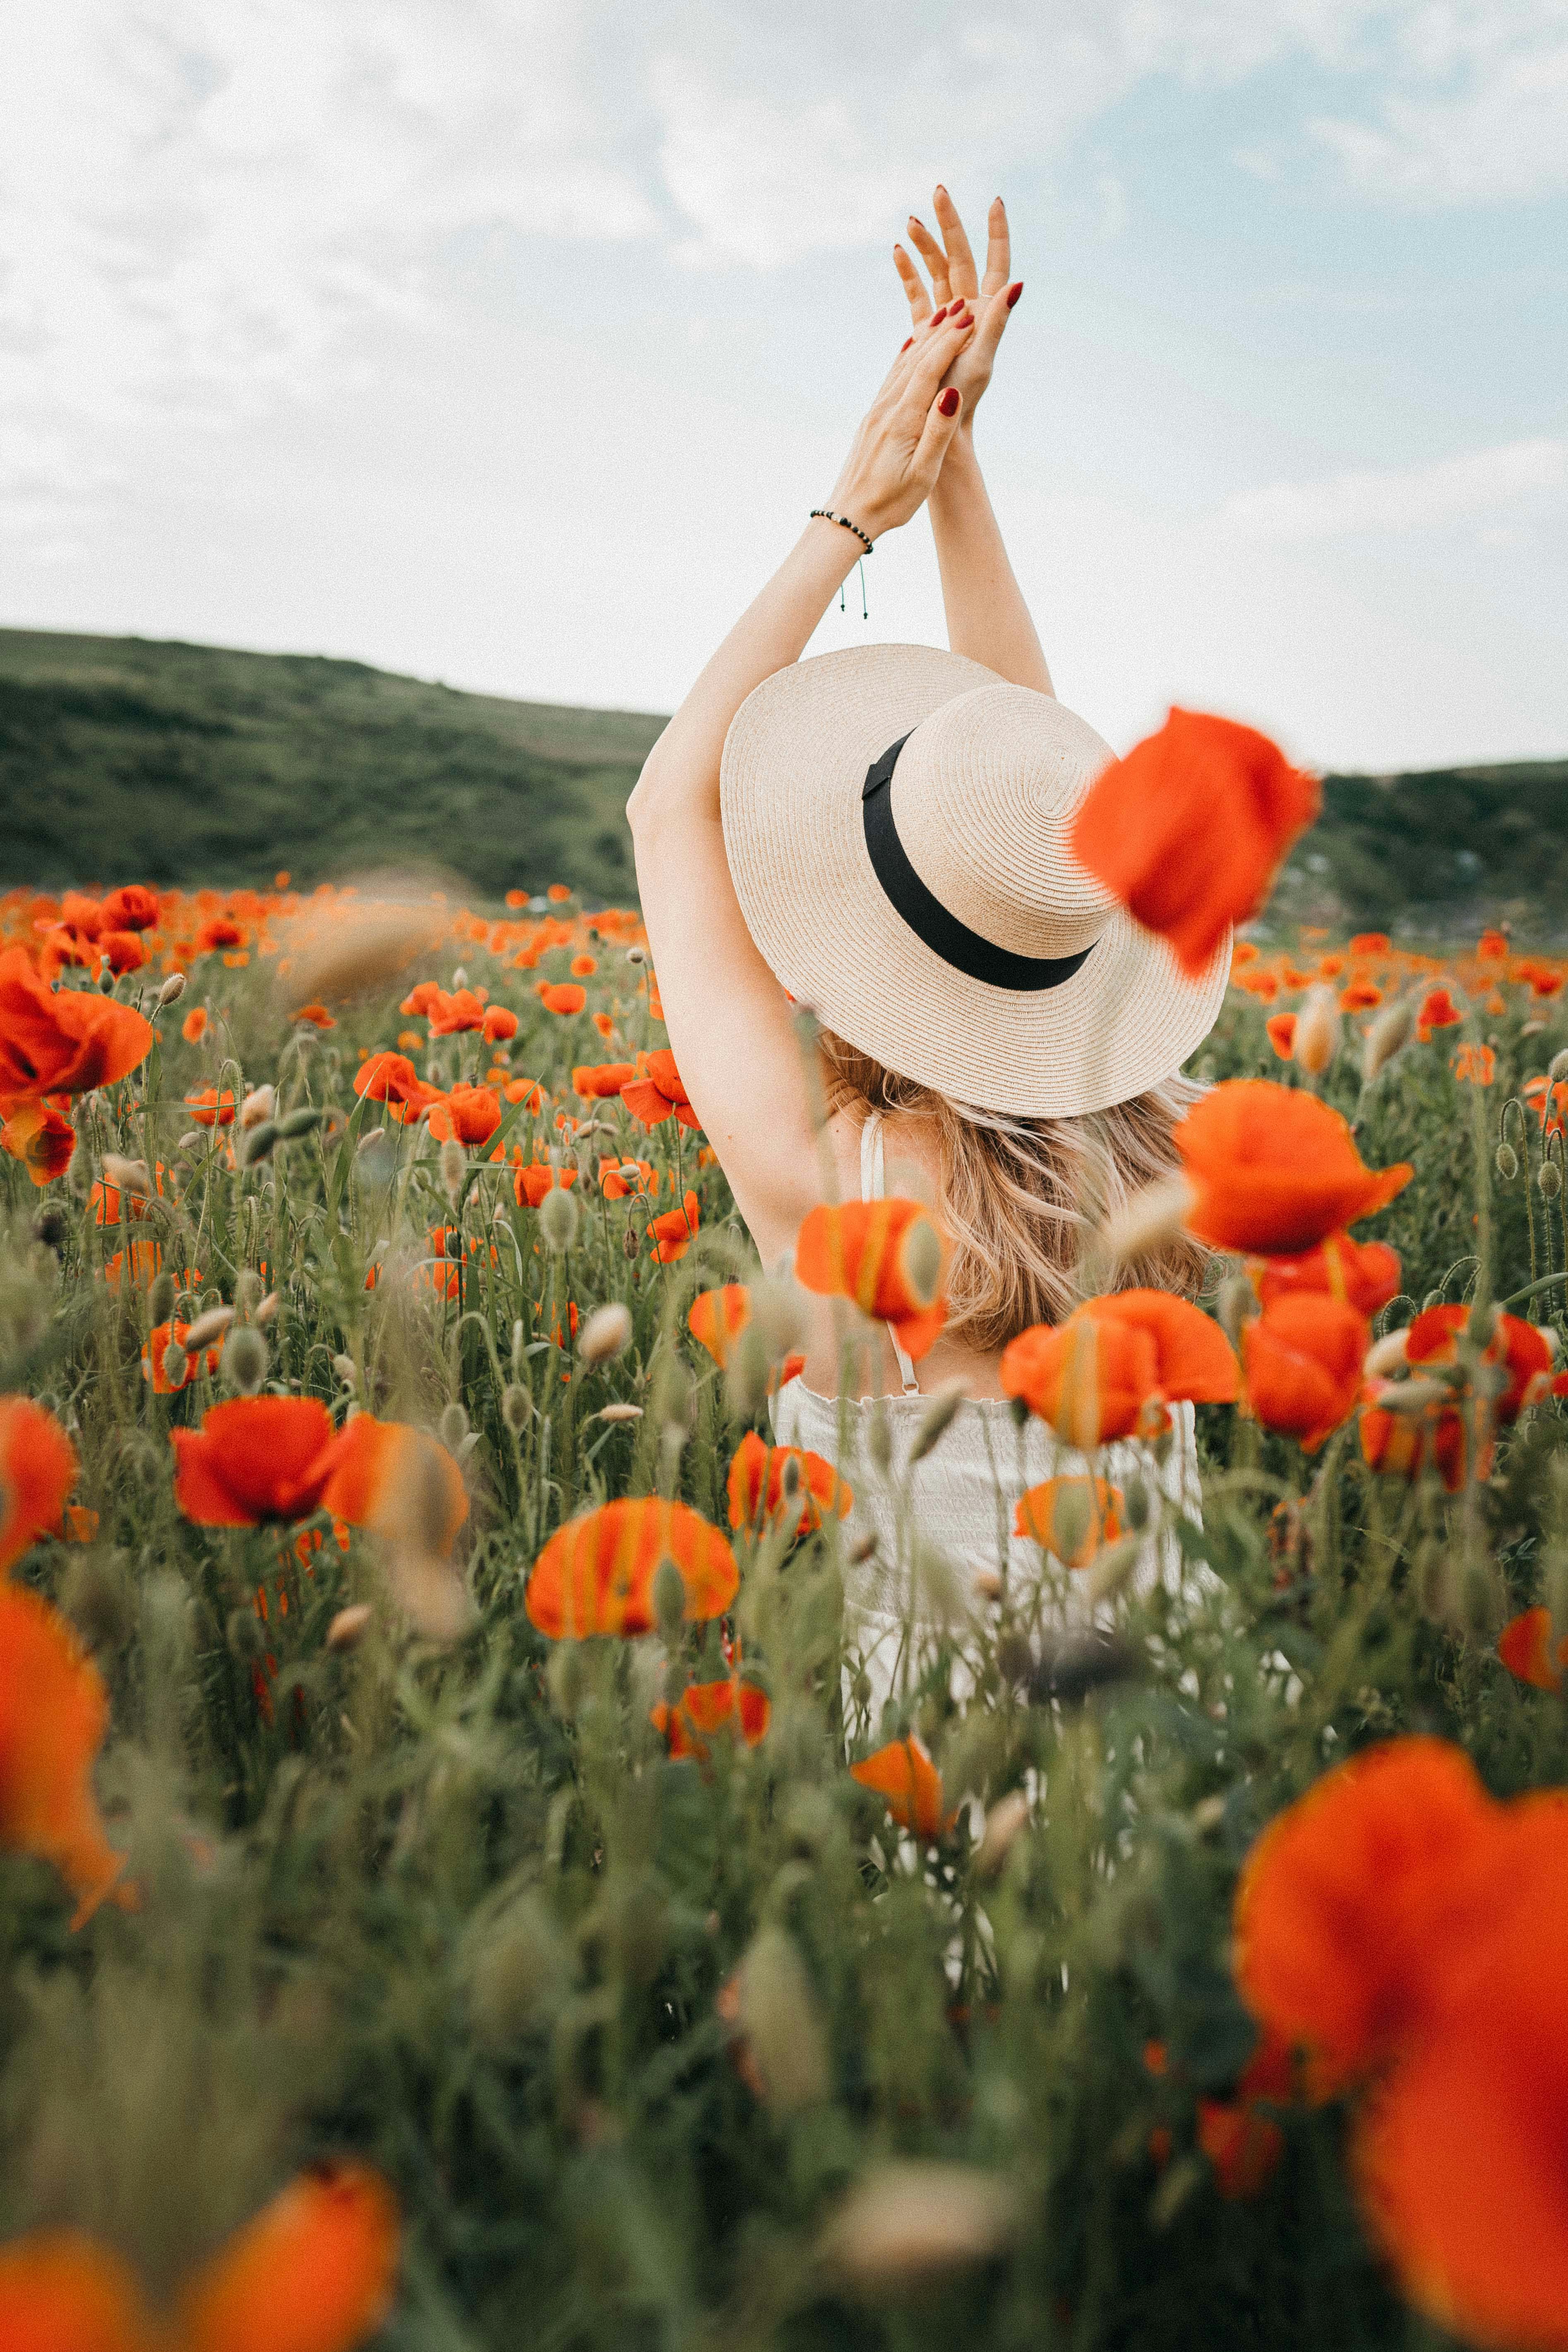 Free Lady in hat standing with raised arms among red poppy flowers Stock Photo